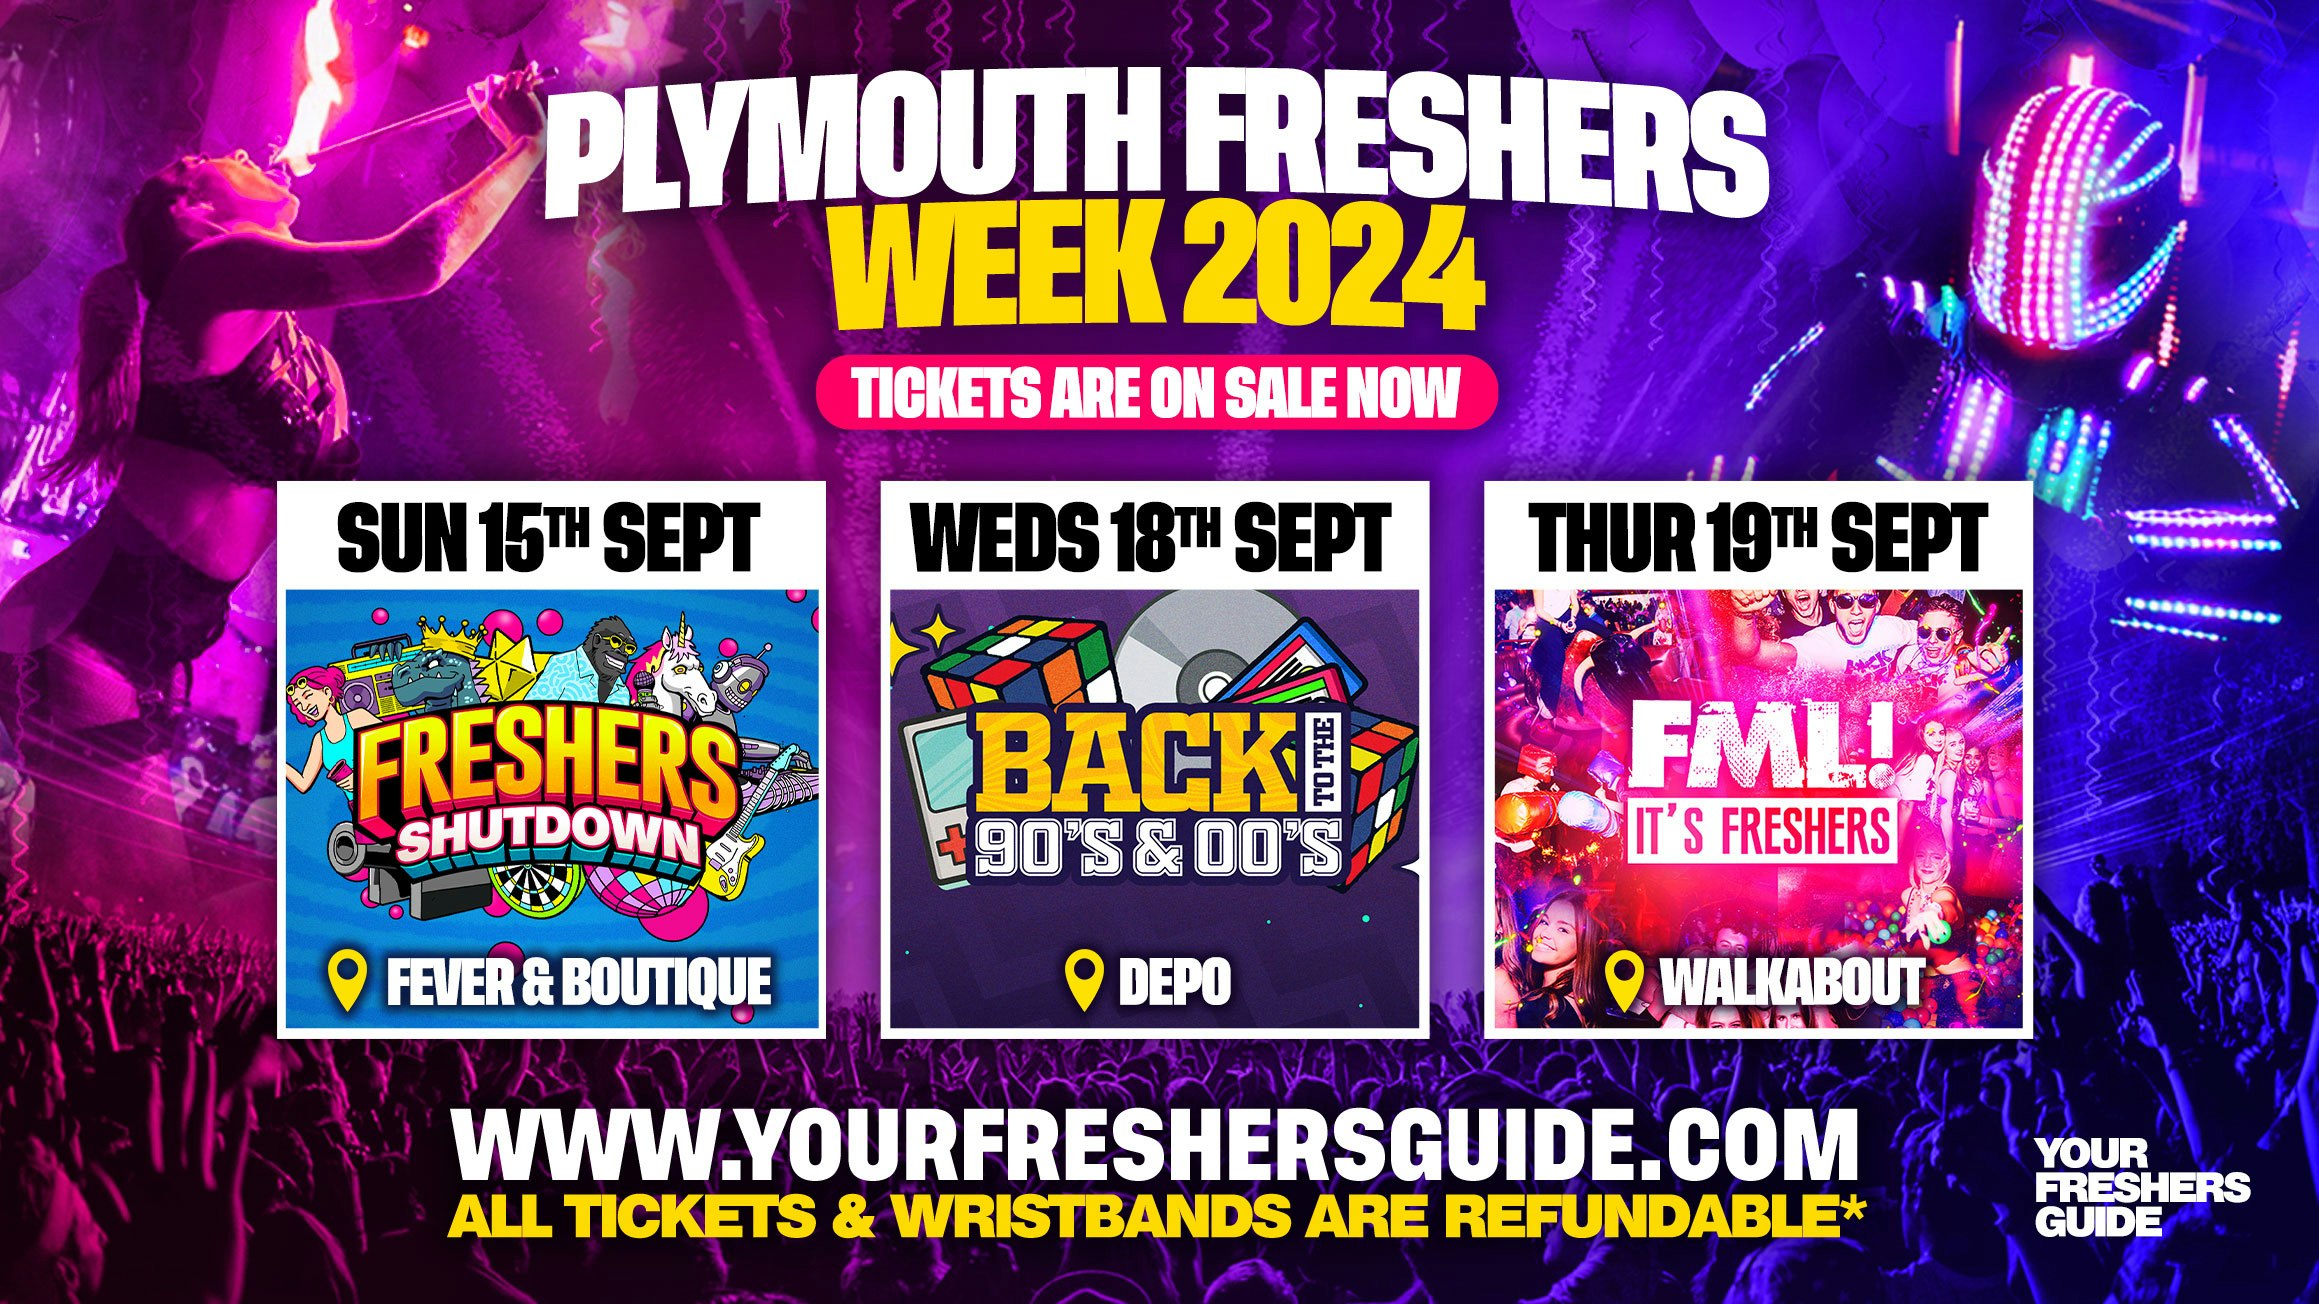 Plymouth Freshers Week Wristband 2024 – The Biggest Events of Plymouth Freshers 2024 🎉 – FREE Queue Jump With EVERY TICKET – TODAY ONLY!